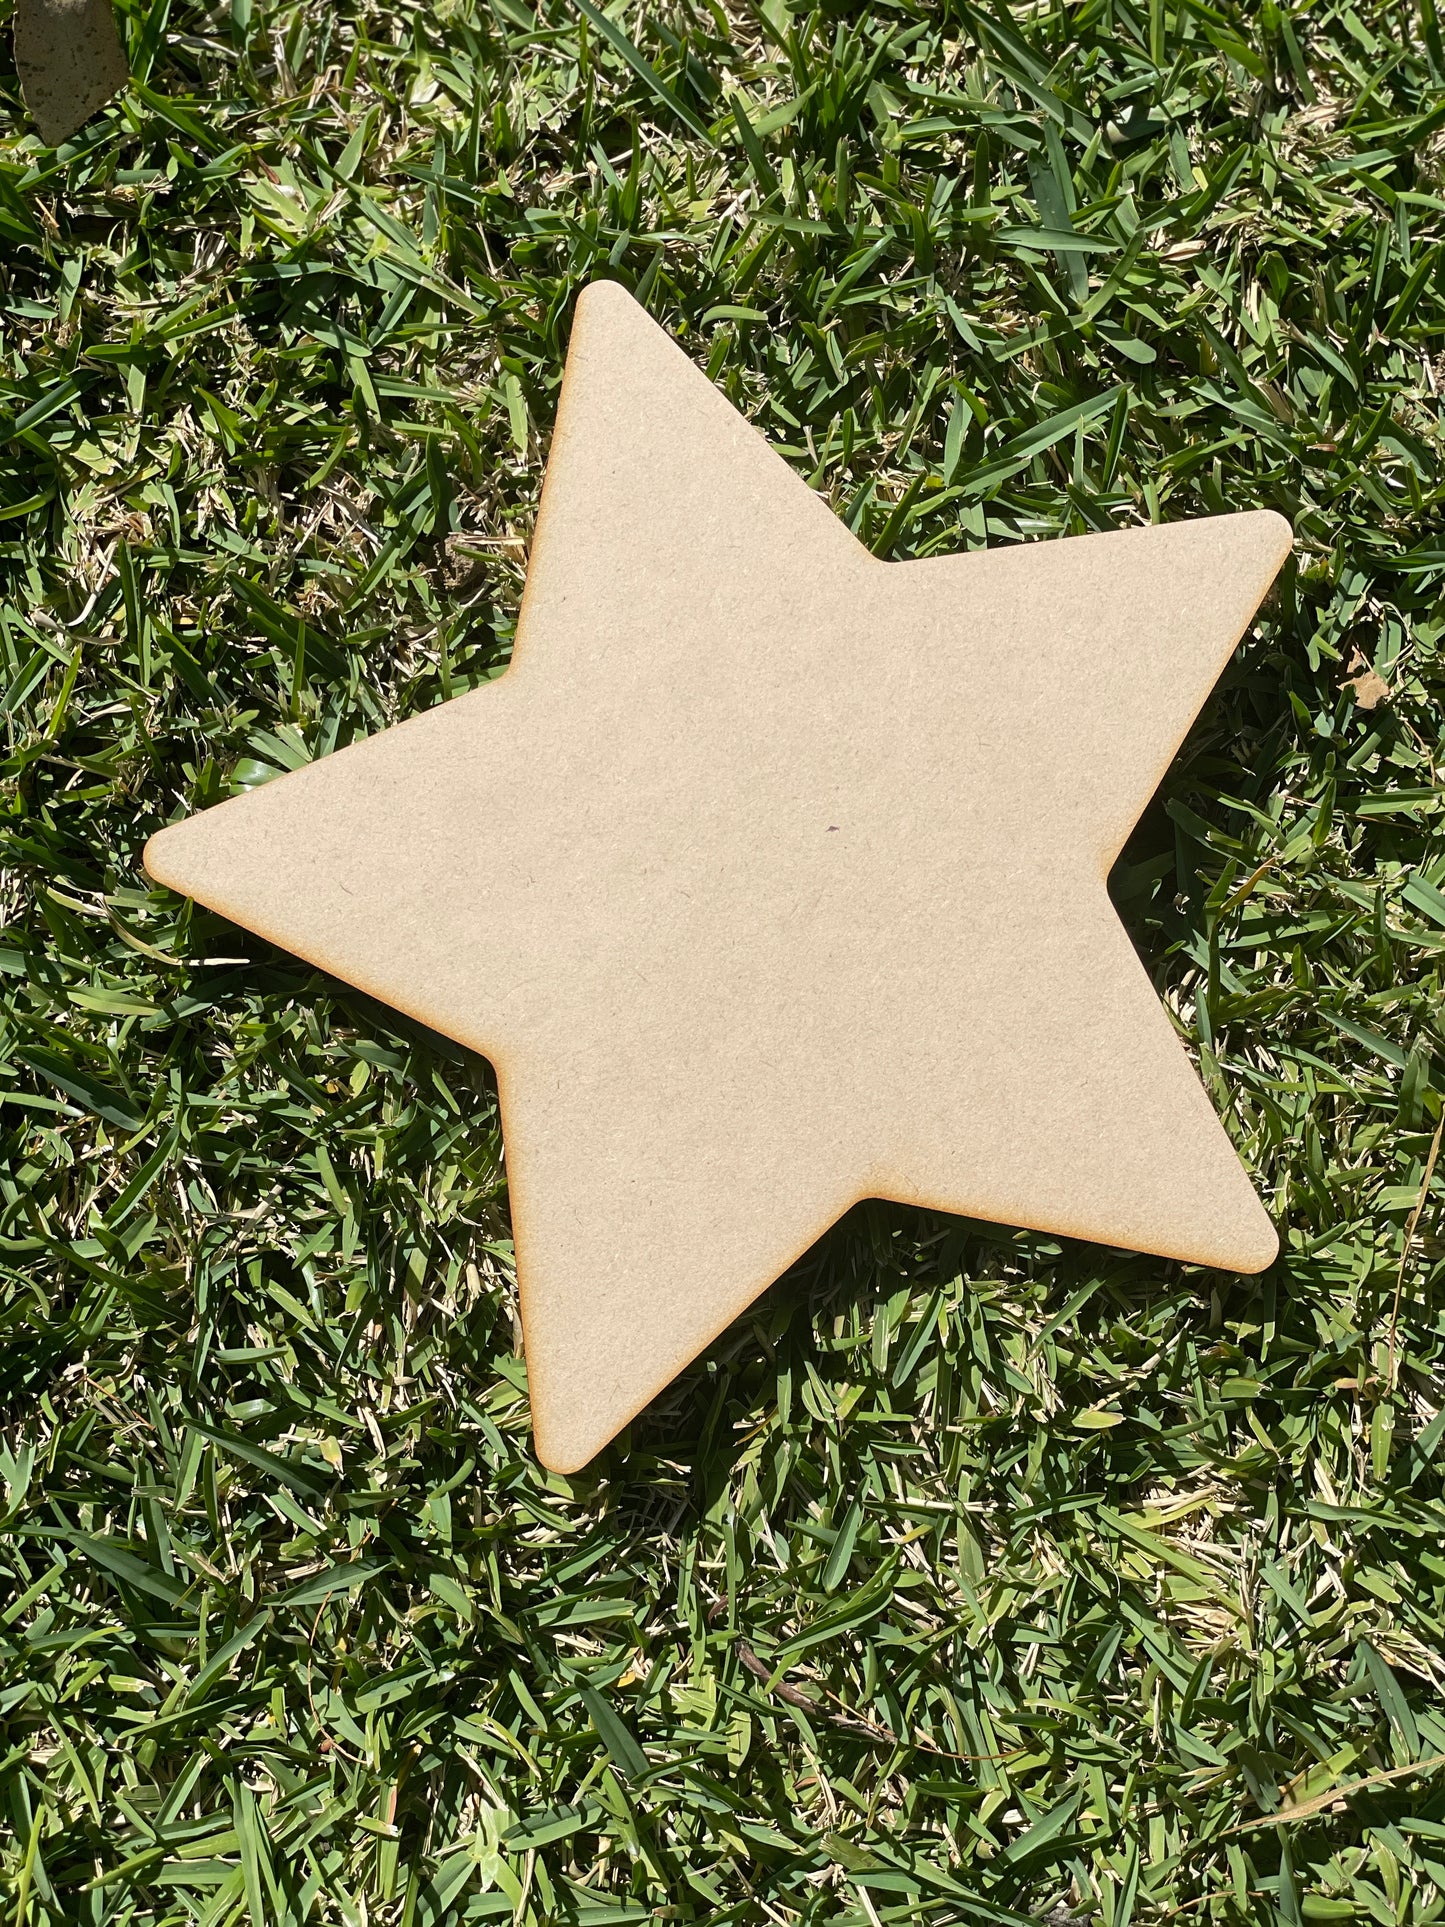 5 Point Star Shape MDF Art Board, Resin Board, Art Blank, Craft Blank ~3mm/6mm/9mm thickness available~